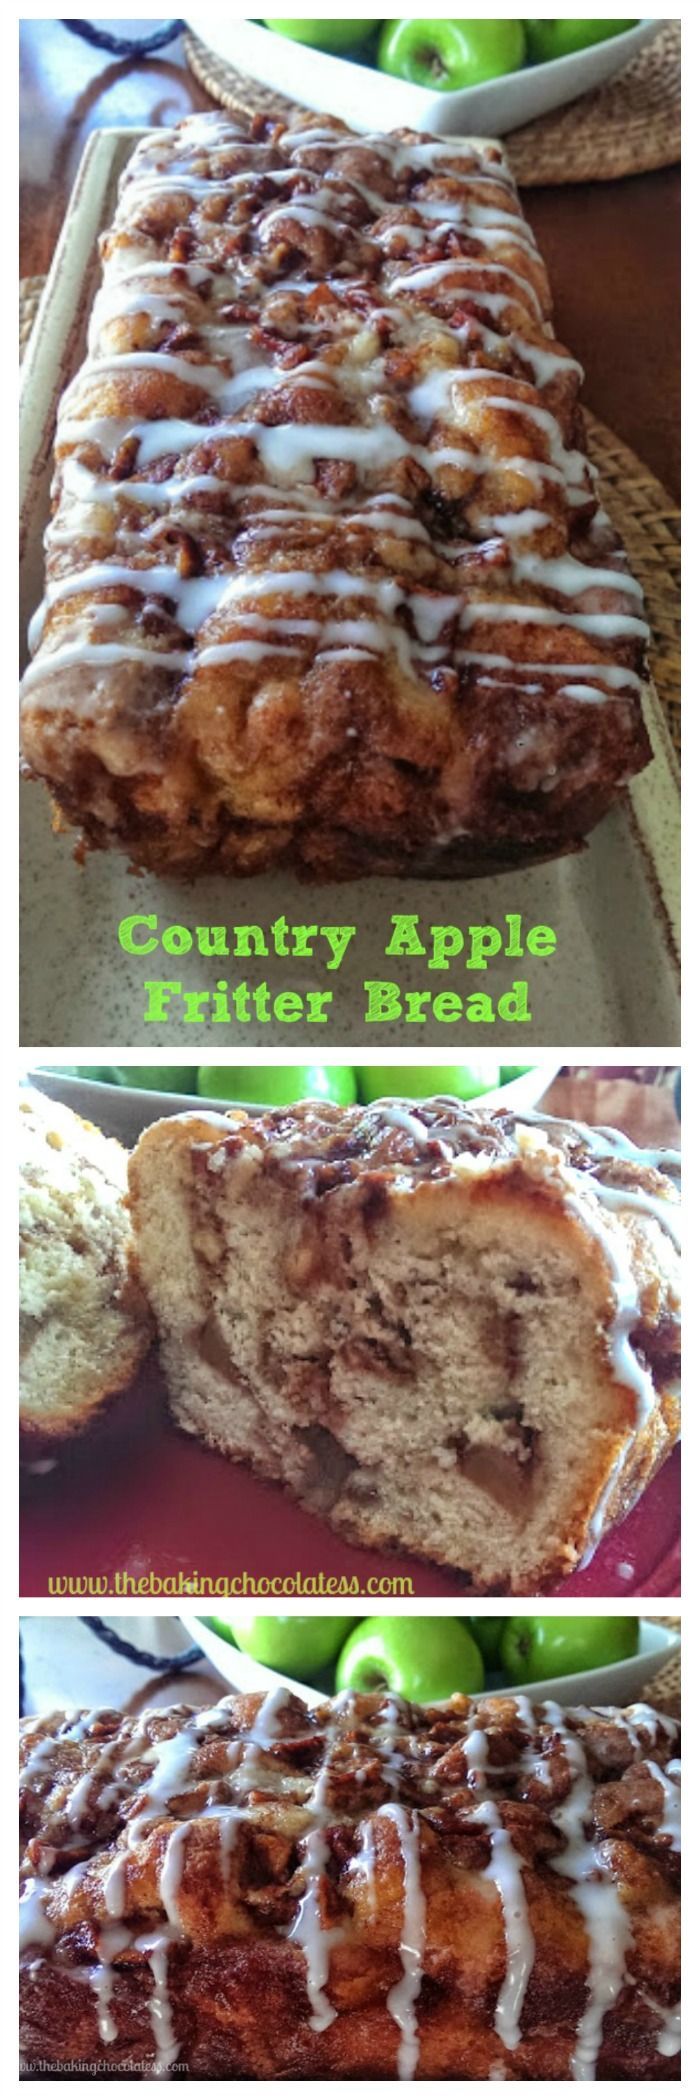 This Awesome Country Apple Fritter Bread  is one of the top recipes on the blog!  It’s so versatile, delicious and doesn’t